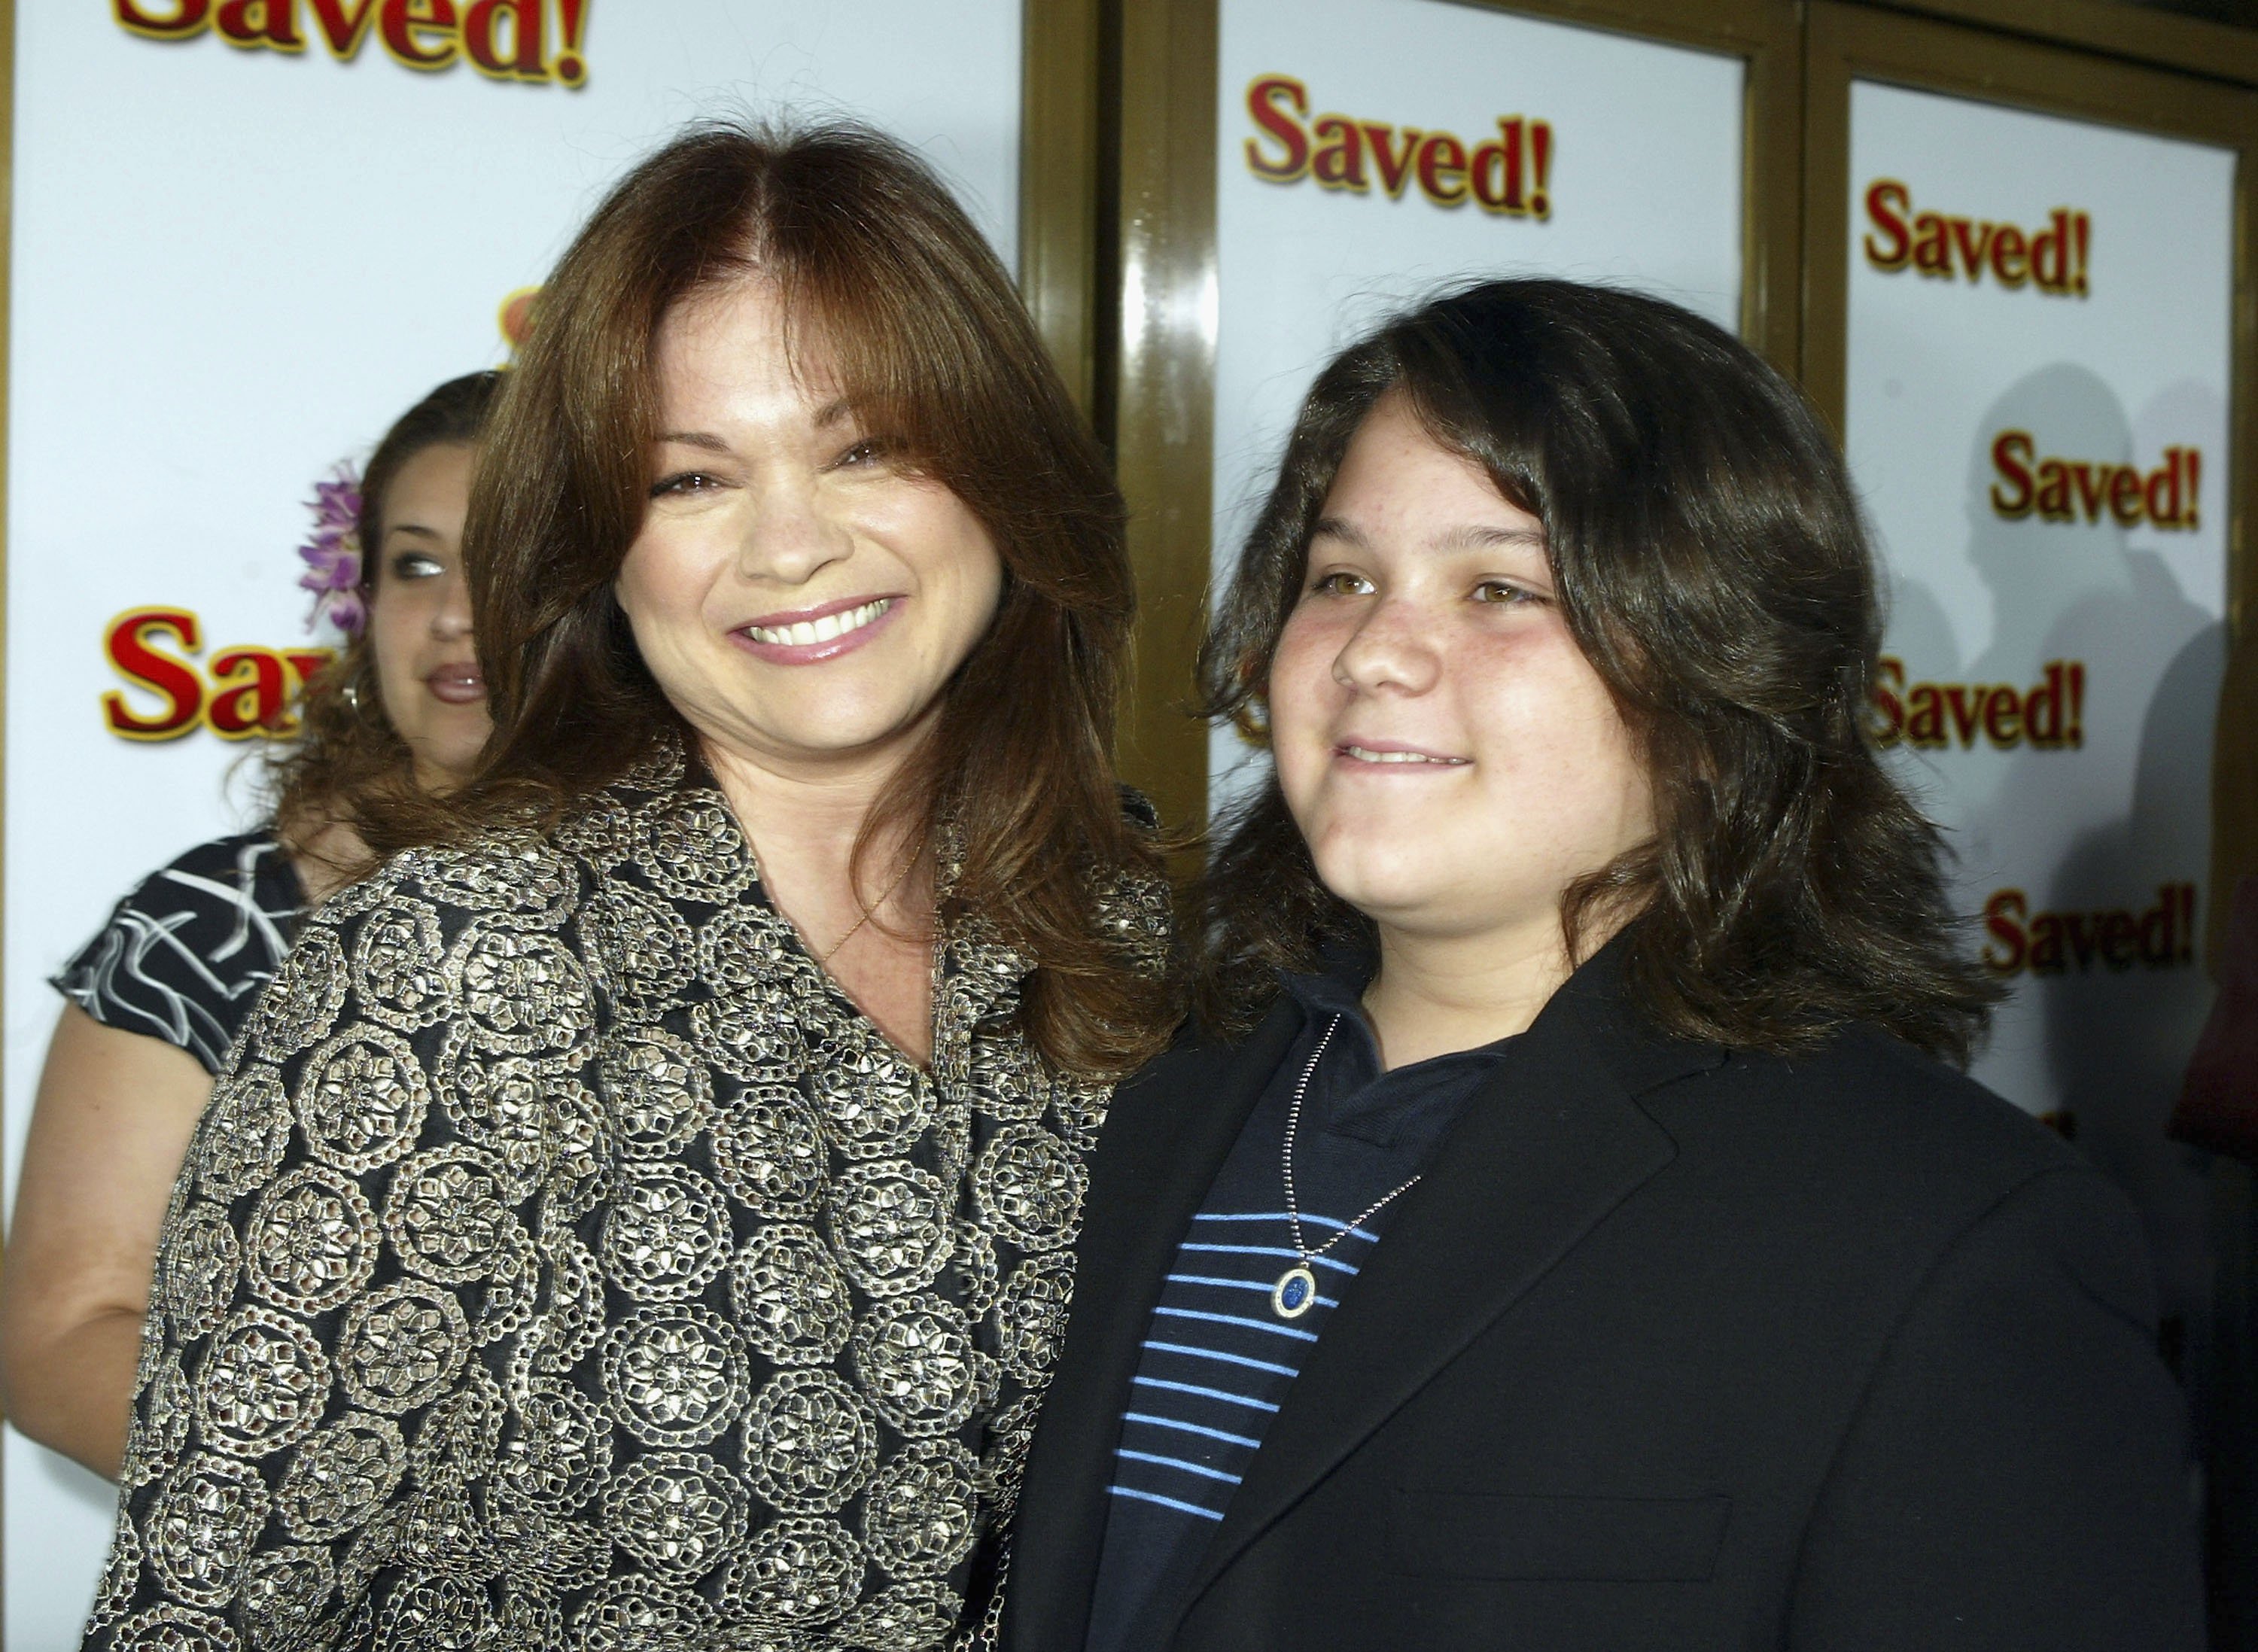 Valerie Bertinelli and her son Wolfgang arrive at United Artists' "Saved" premiere at the National Theatre on May 13, 2004, in Los Angeles, California. | Source: Getty Images